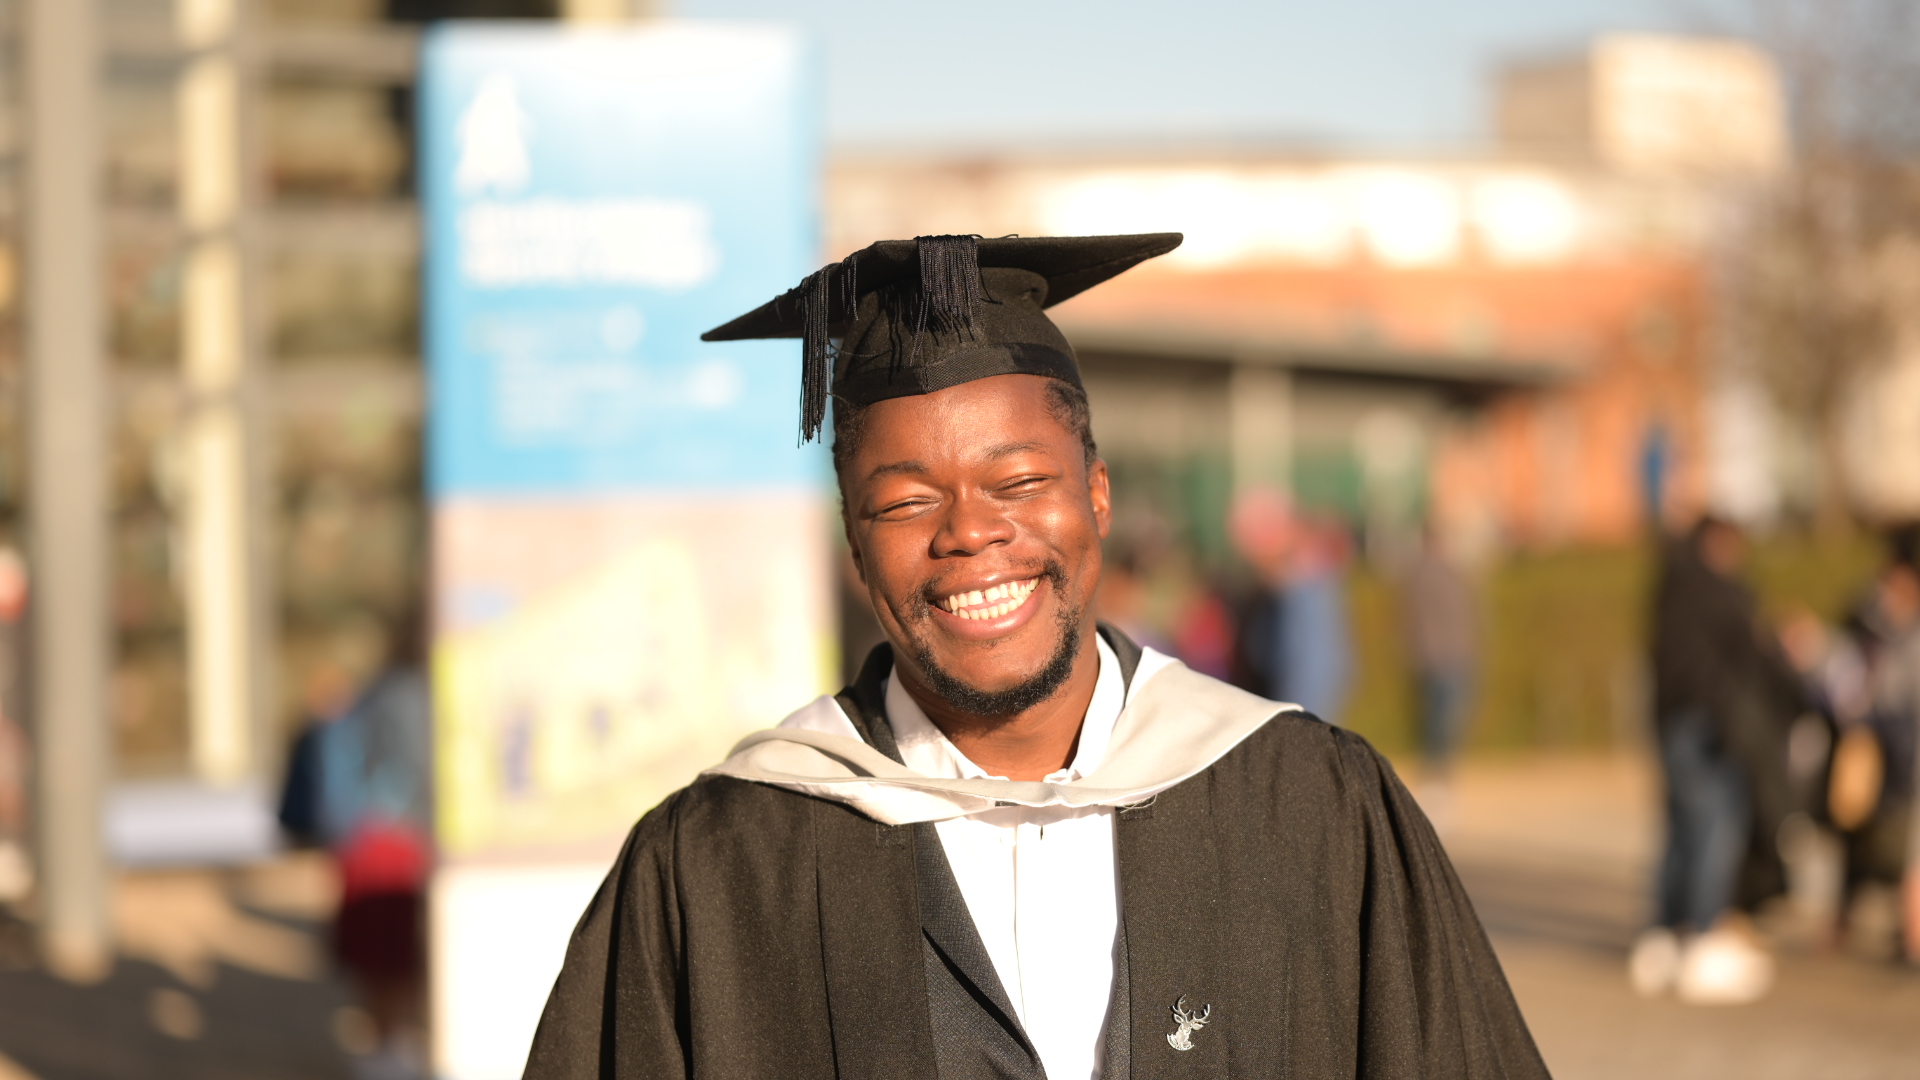 Jubilation as man graduates with 1st class from UK University after clinching 3rd class 10 years before in Nigeria [photos]